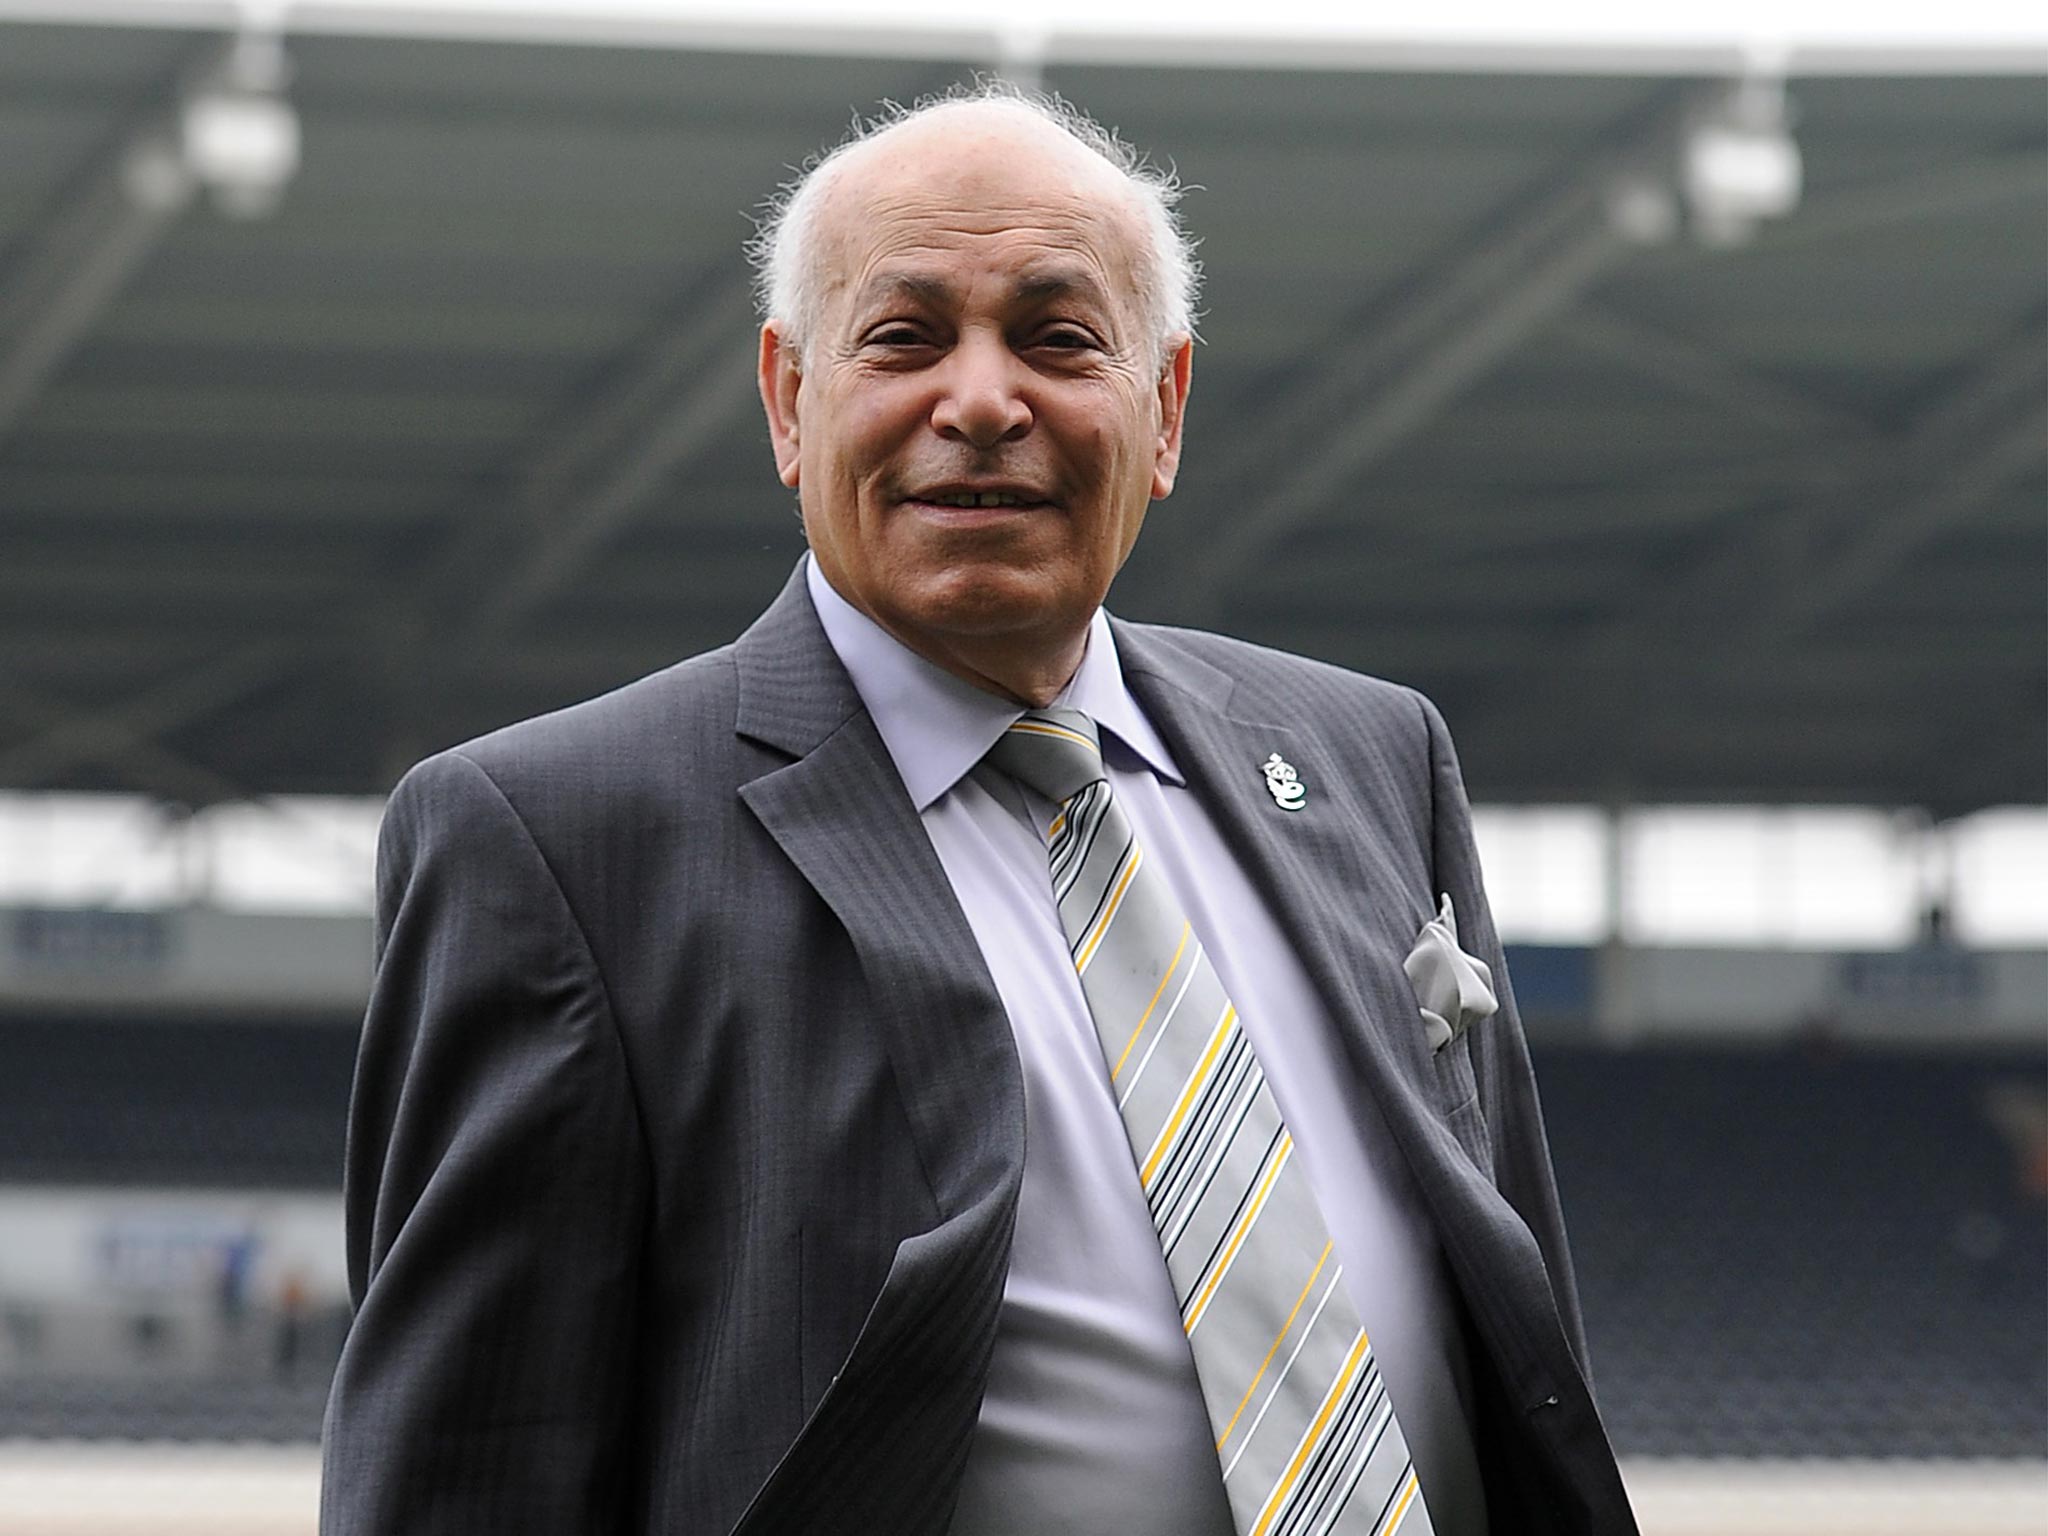 Assem Allam will be checking squash scores at Wembley